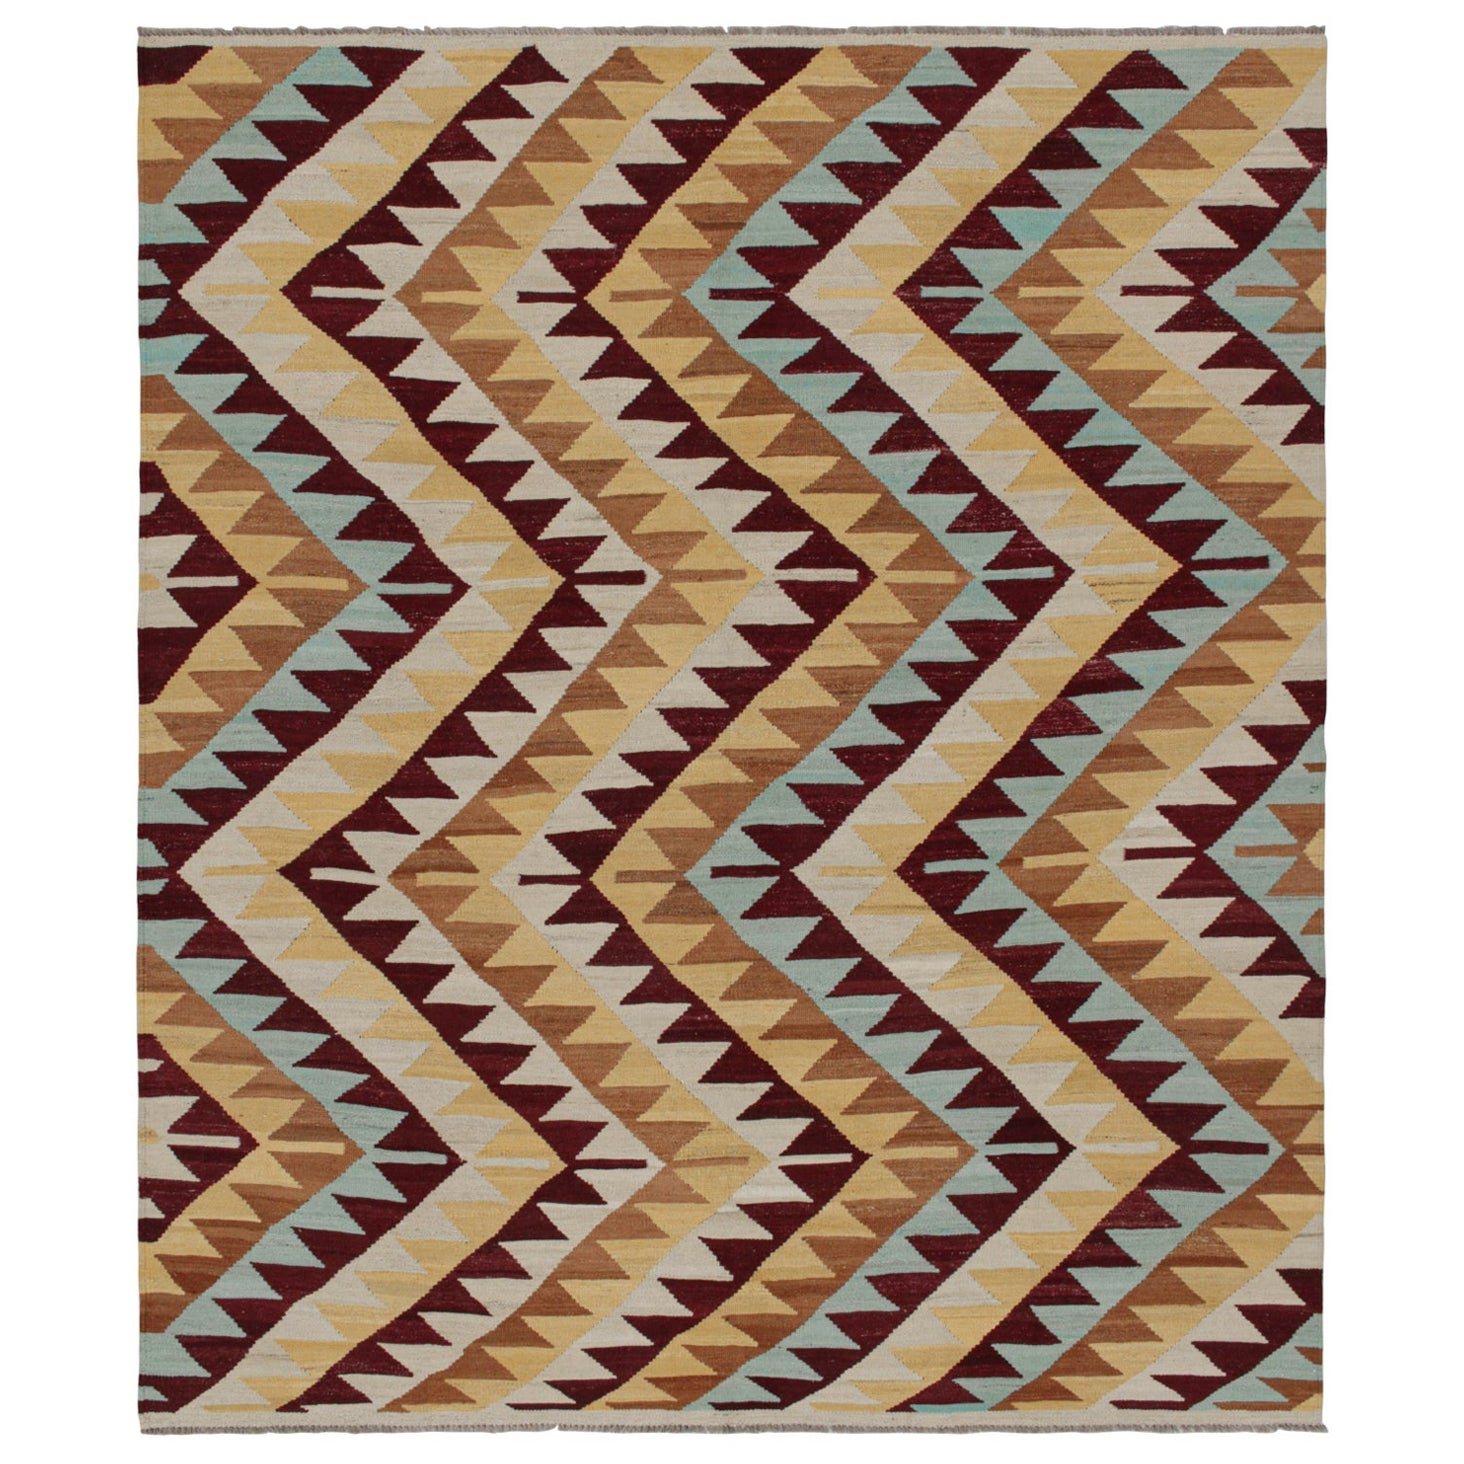 Rug & Kilim’s Tribal Style Kilim in Red, Blue and Beige-Brown Geometric Patterns For Sale